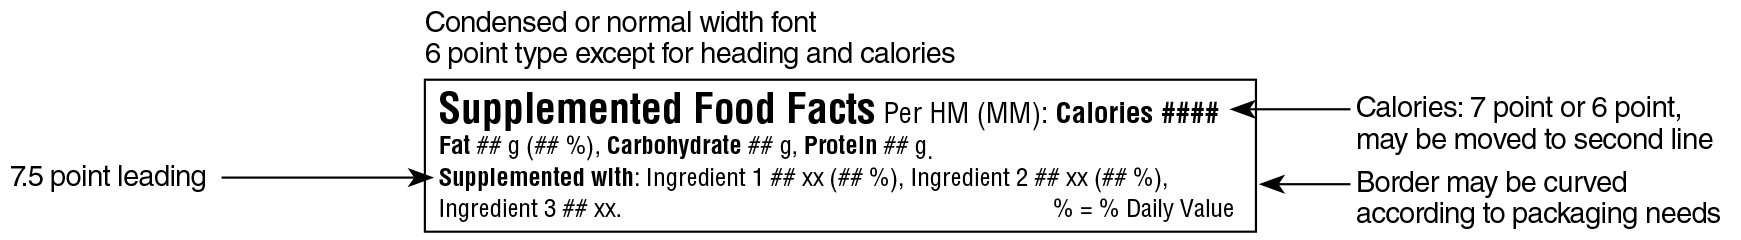 An English Supplemented Food Facts table in simplified linear format for one serving surrounded and specifications. Text version below.